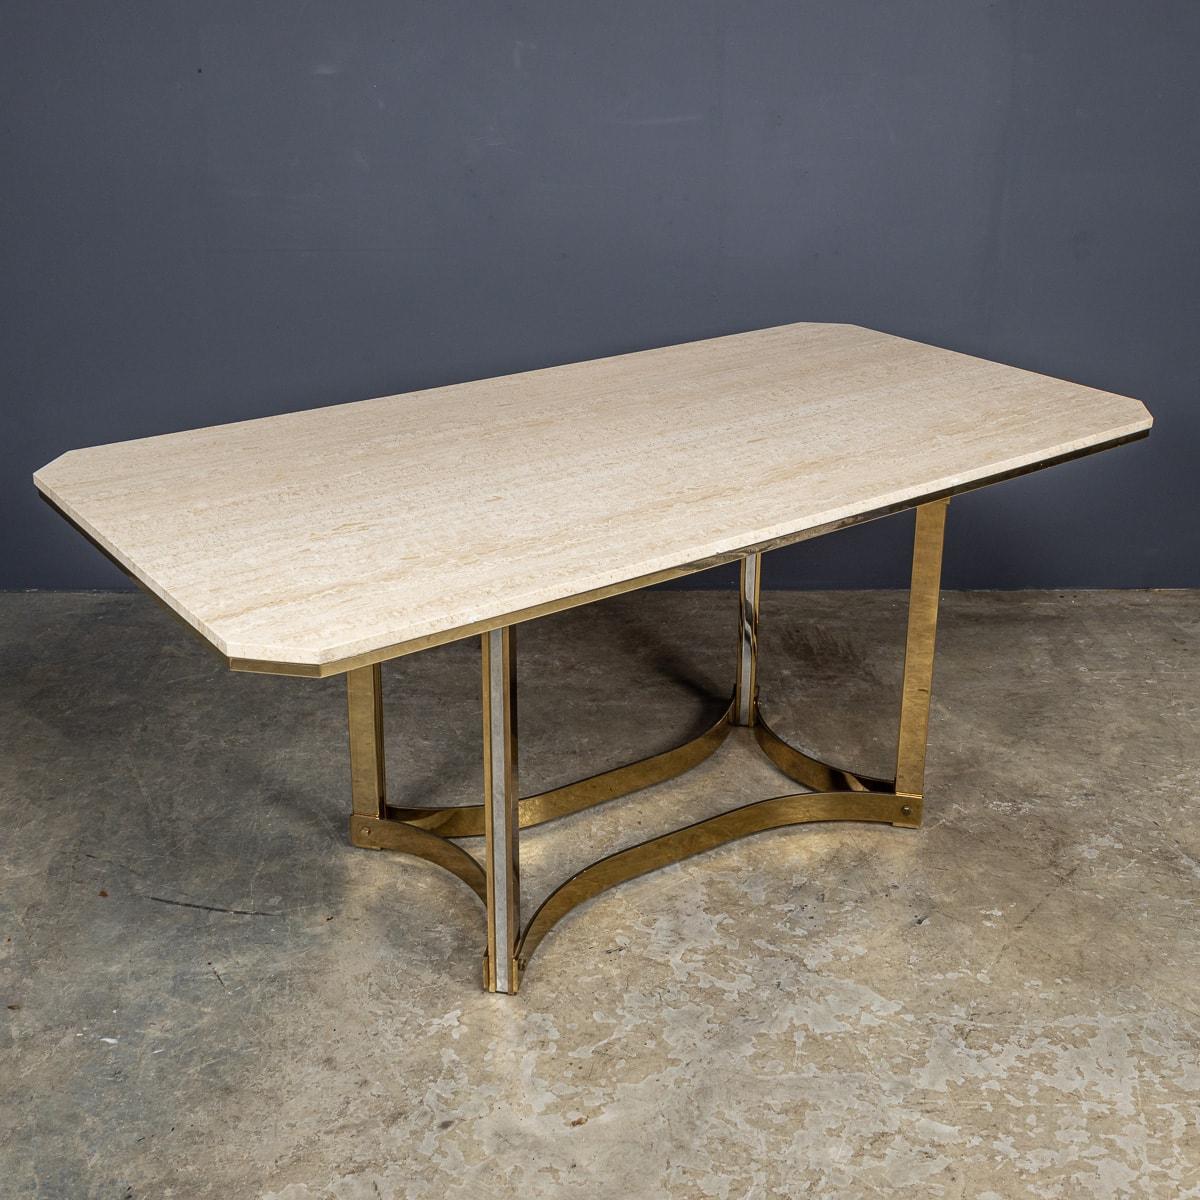 Vintage 20th Century Italian Travertine & Gold Dining Table, Alessandro Albrizzi In Good Condition For Sale In Royal Tunbridge Wells, Kent